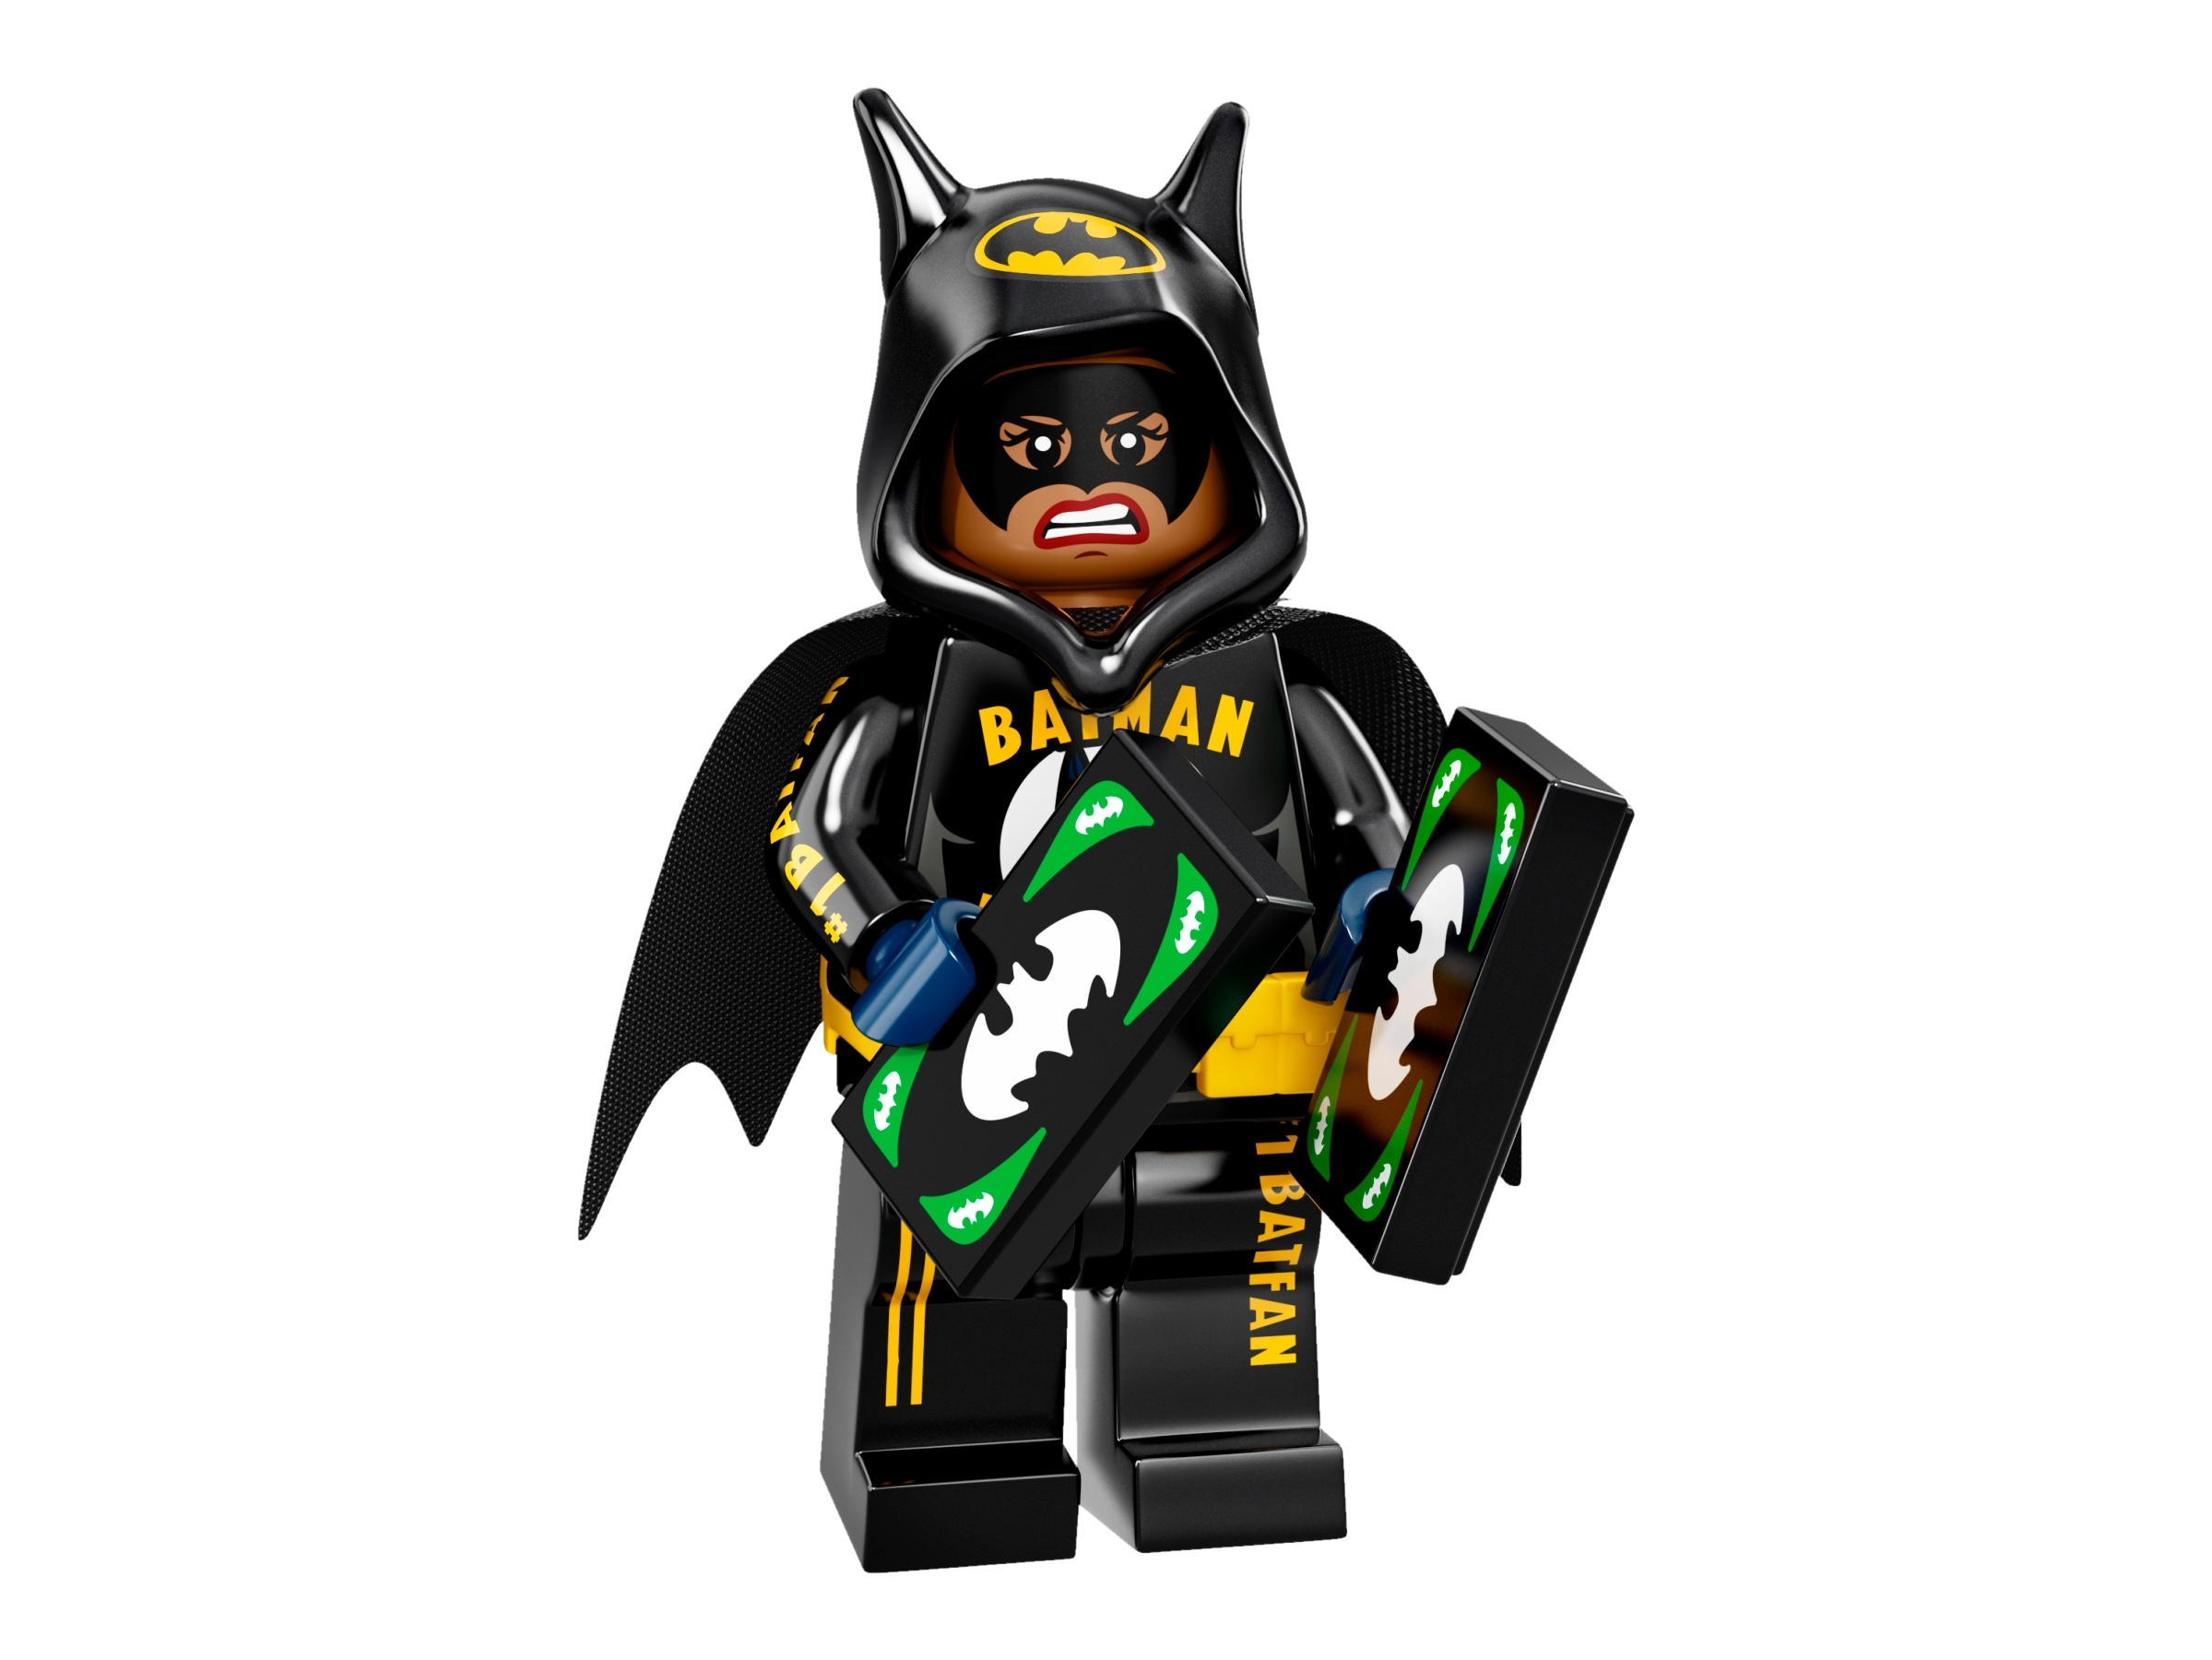 GENUINE LEGO BATMAN MOVIE 2 MINIFIGURE VACATION ALFRED BUY ANY 3 GET 4TH FREE 